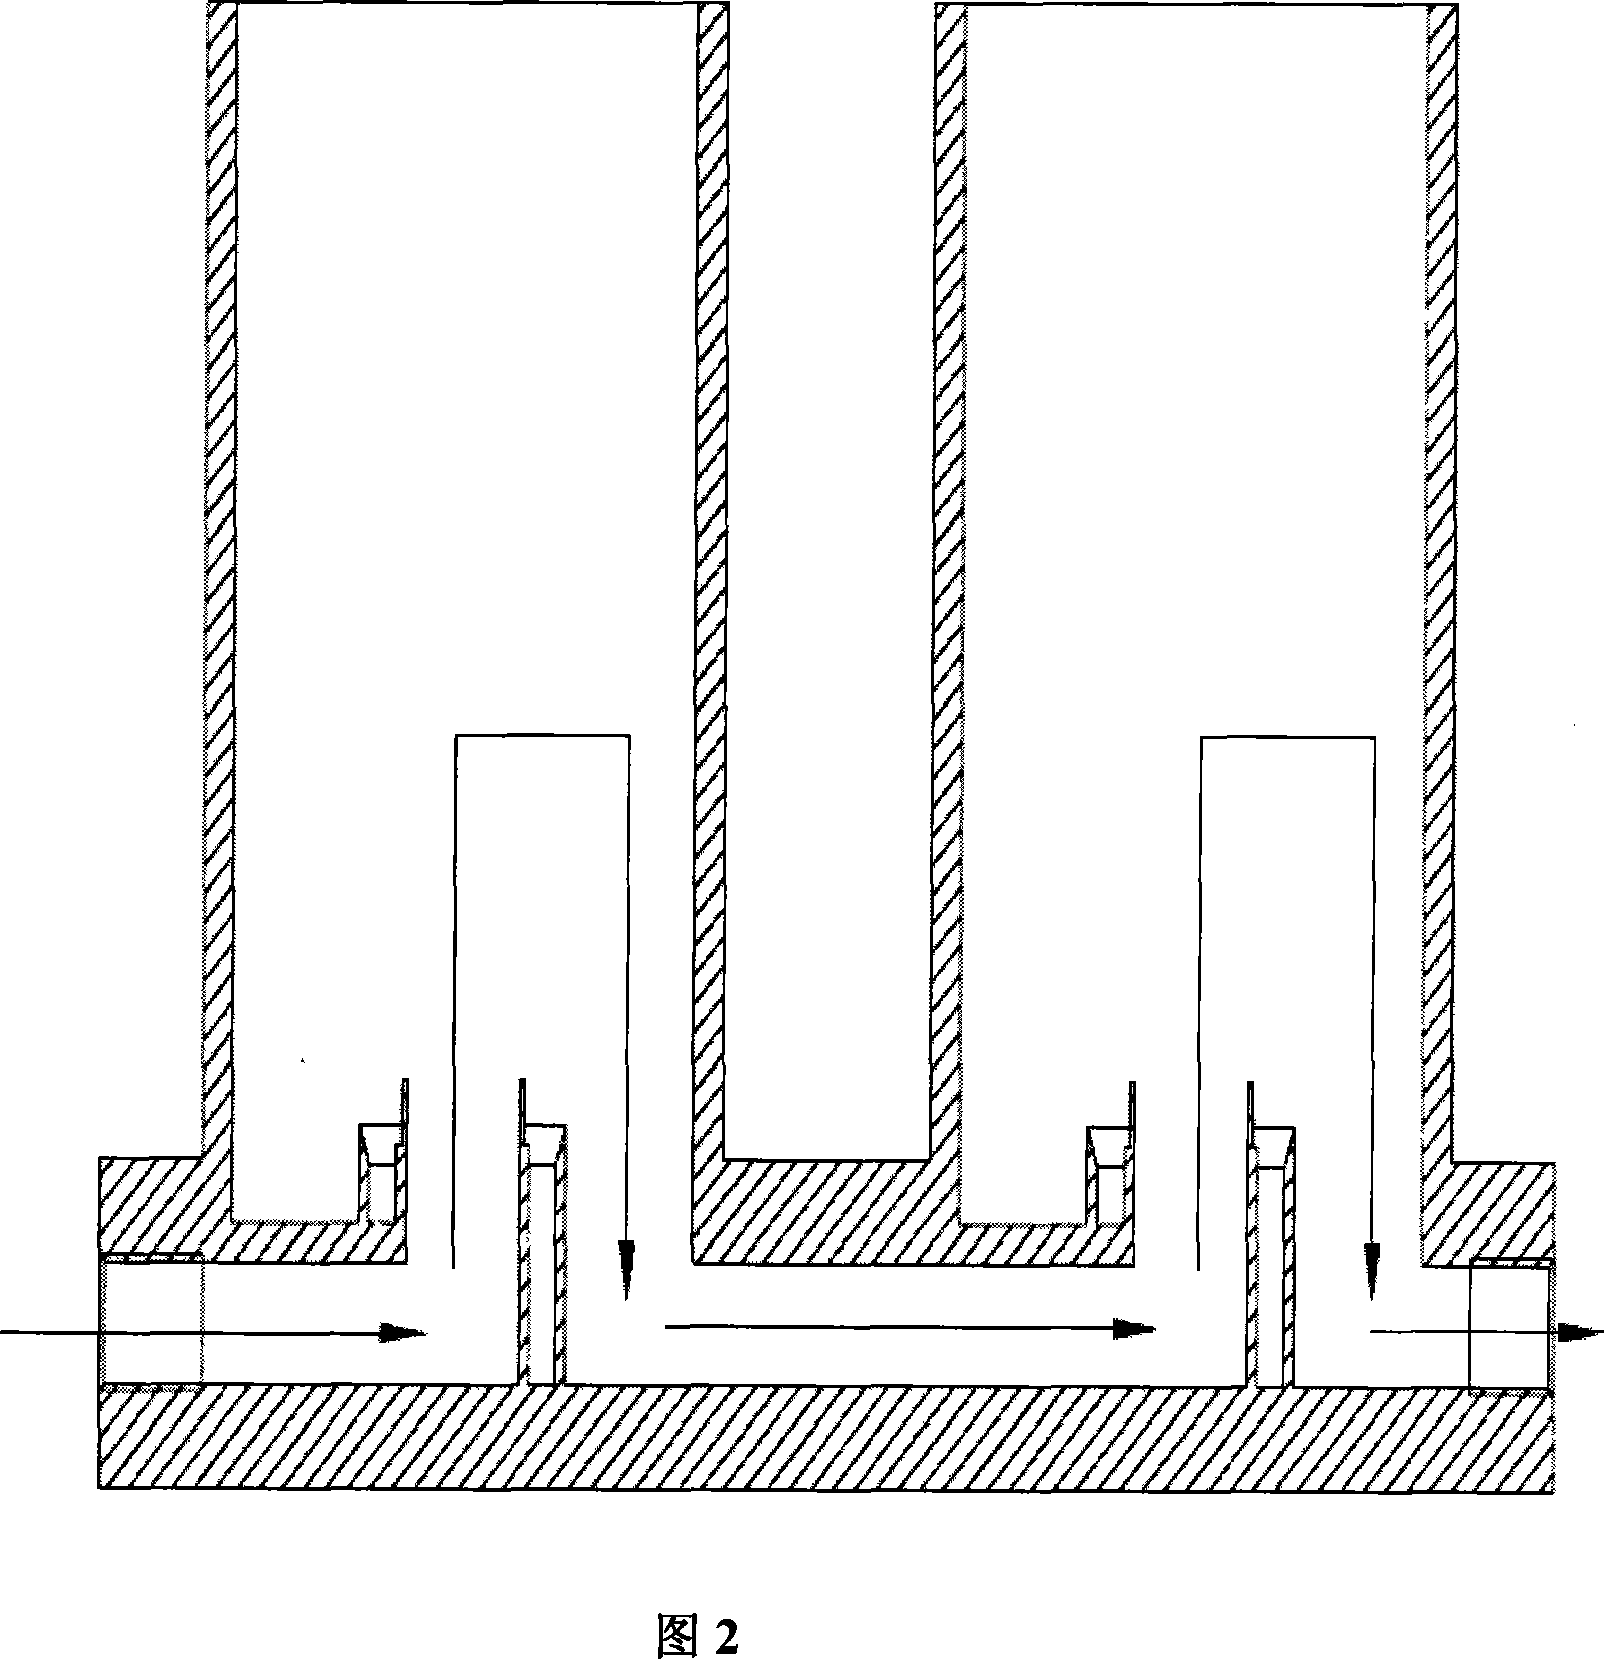 Bi-directional two stage composite filter structure